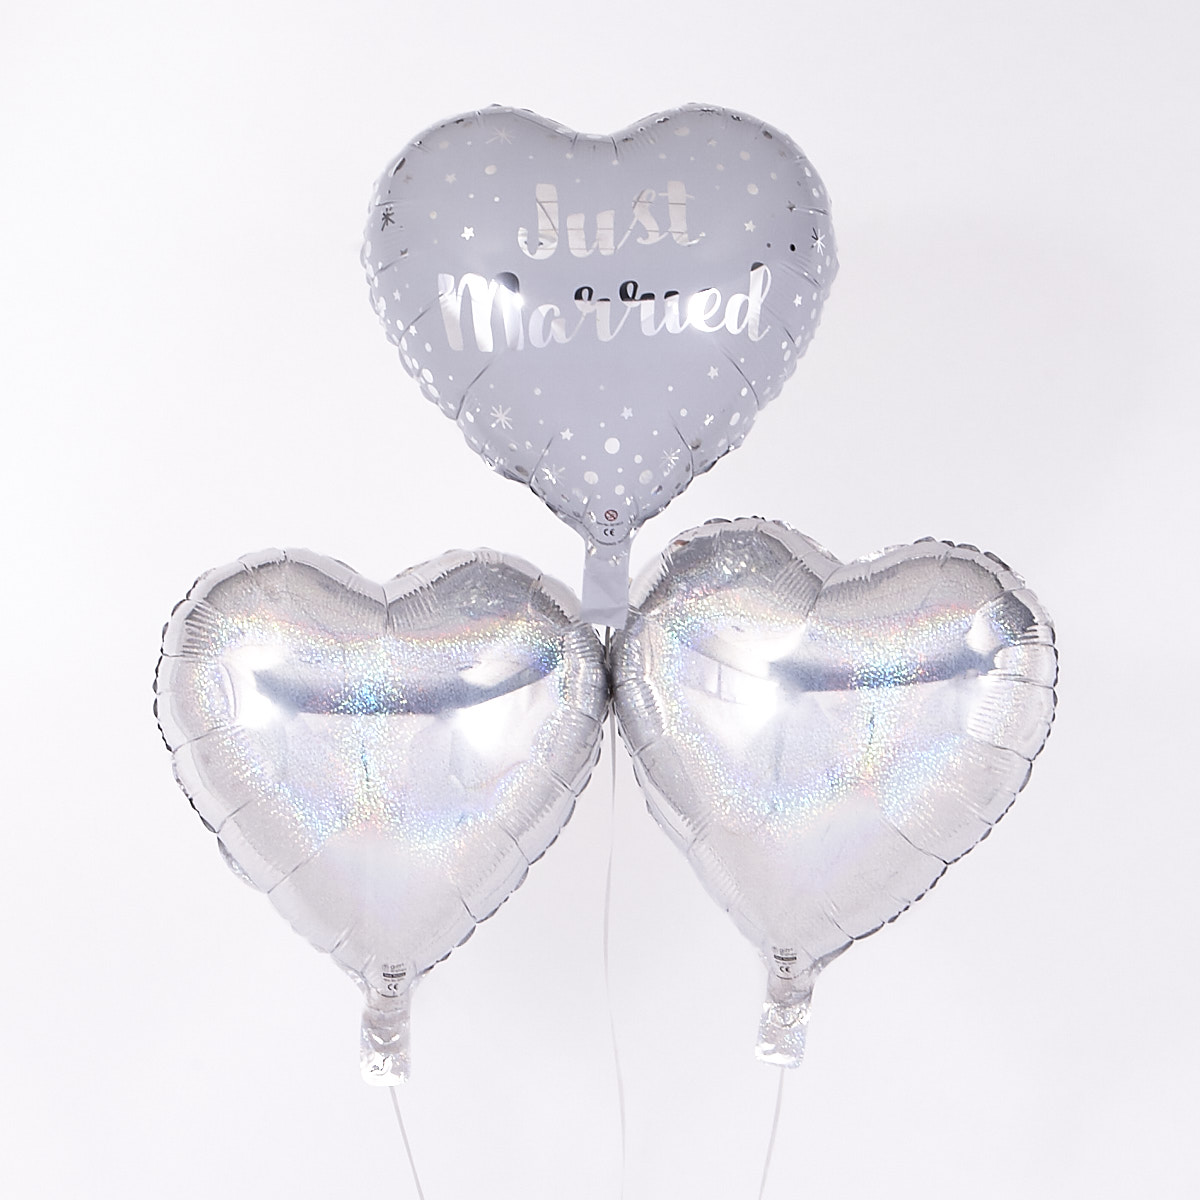 Heart Shaped Just Married Romantic Balloon Bouquet - DELIVERED INFLATED!